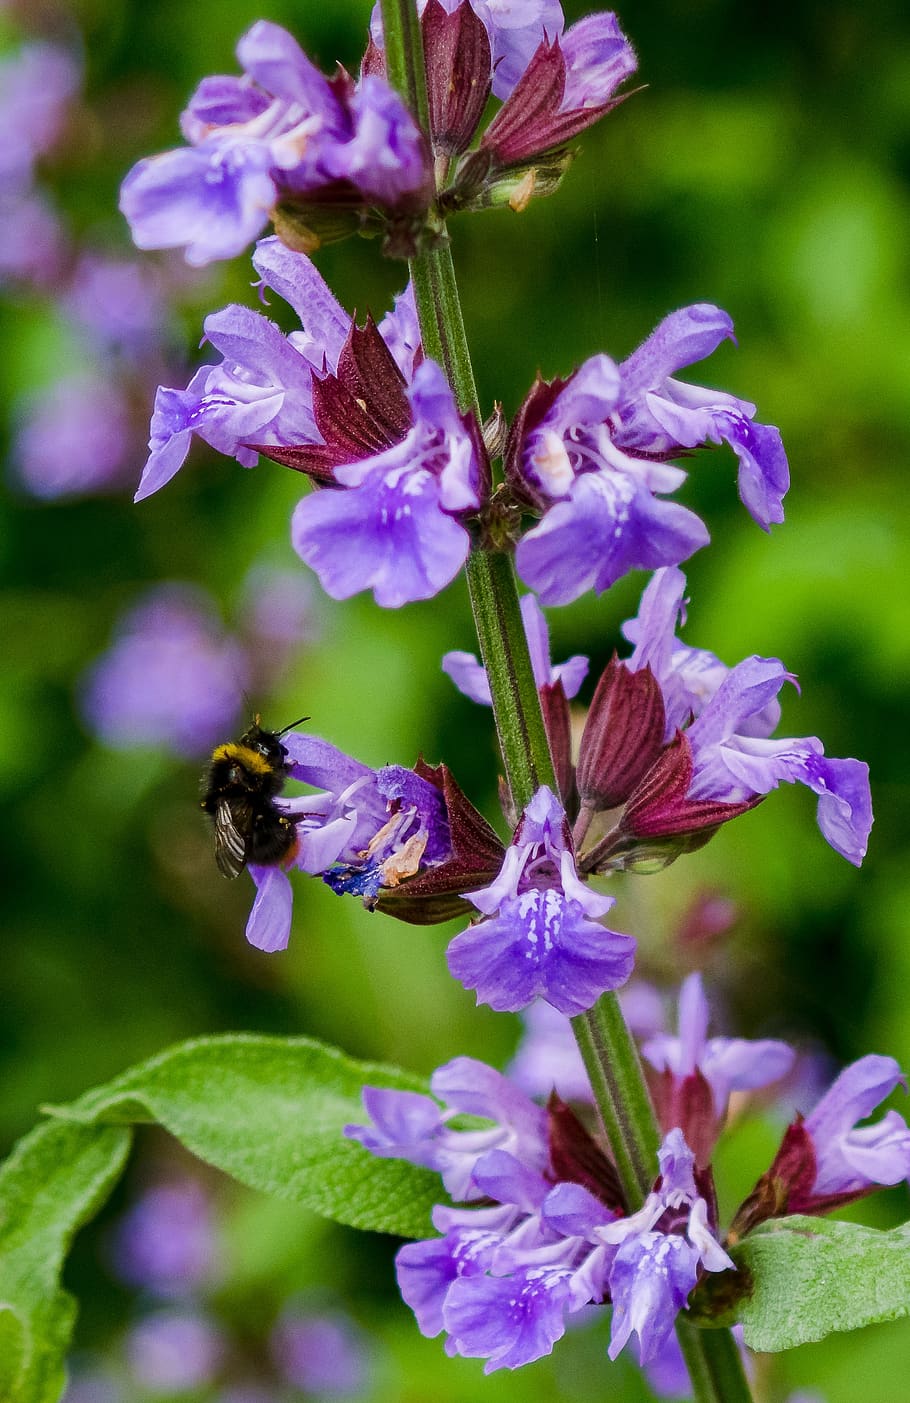 hummel, insect, blossom, bloom, nature, garden, plant, apinae